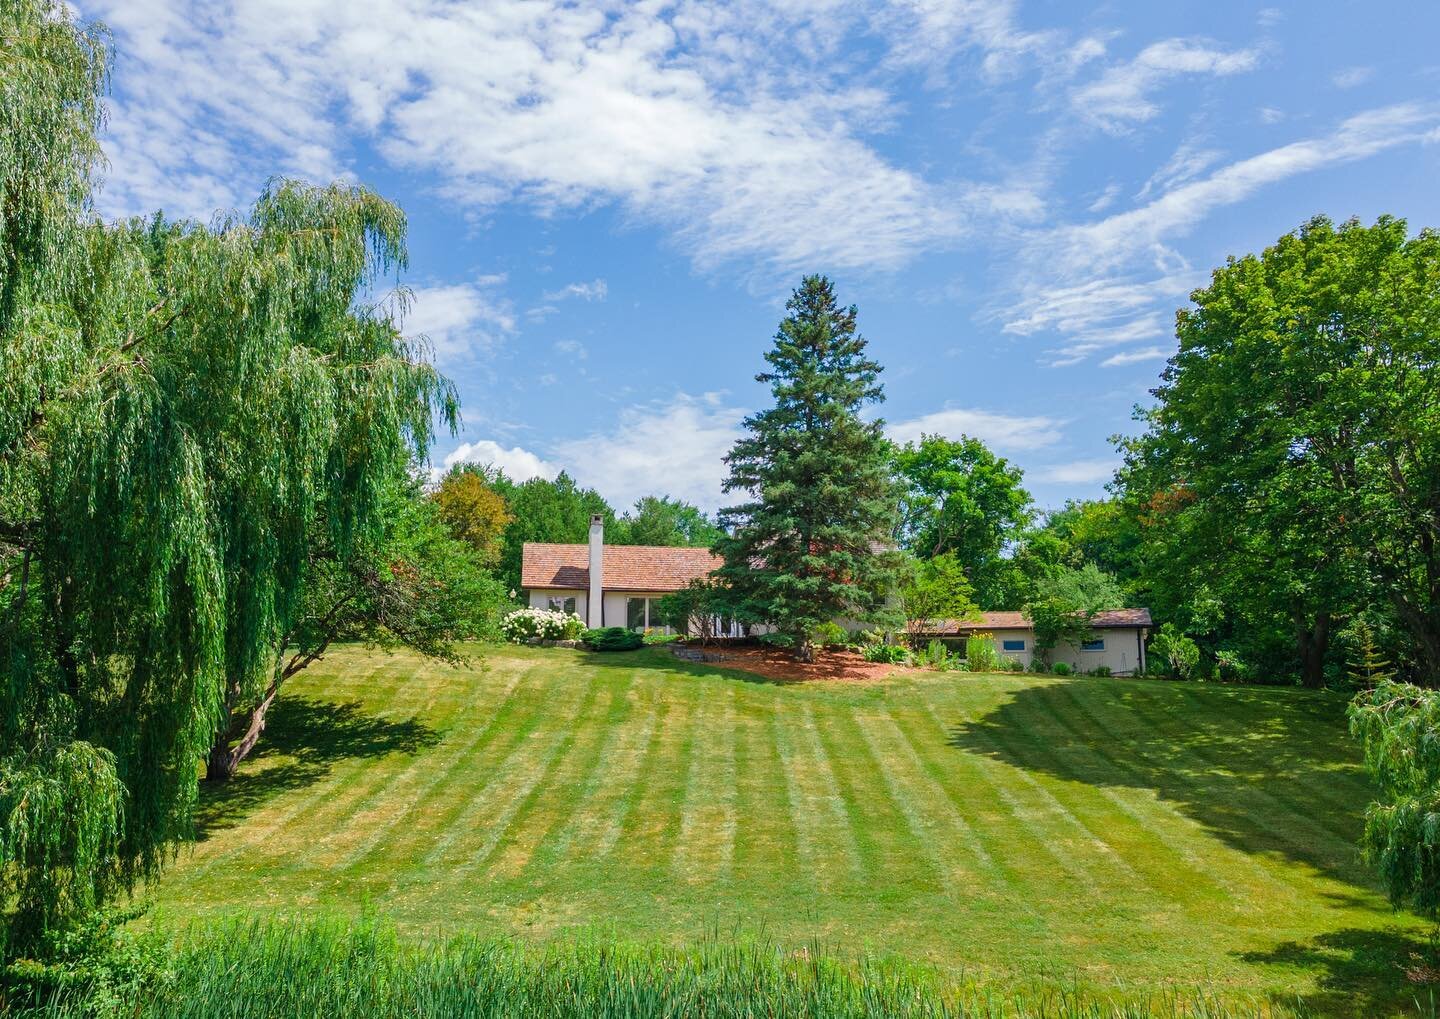 Now available in King Township 🏡✨
.

A winding scenic approach past a spring fed pond, towering willow trees and park-like lawn and gardens leads to a newly renovated modern farmhouse in prime King Township. 

The thoughtfully curated outdoor space 